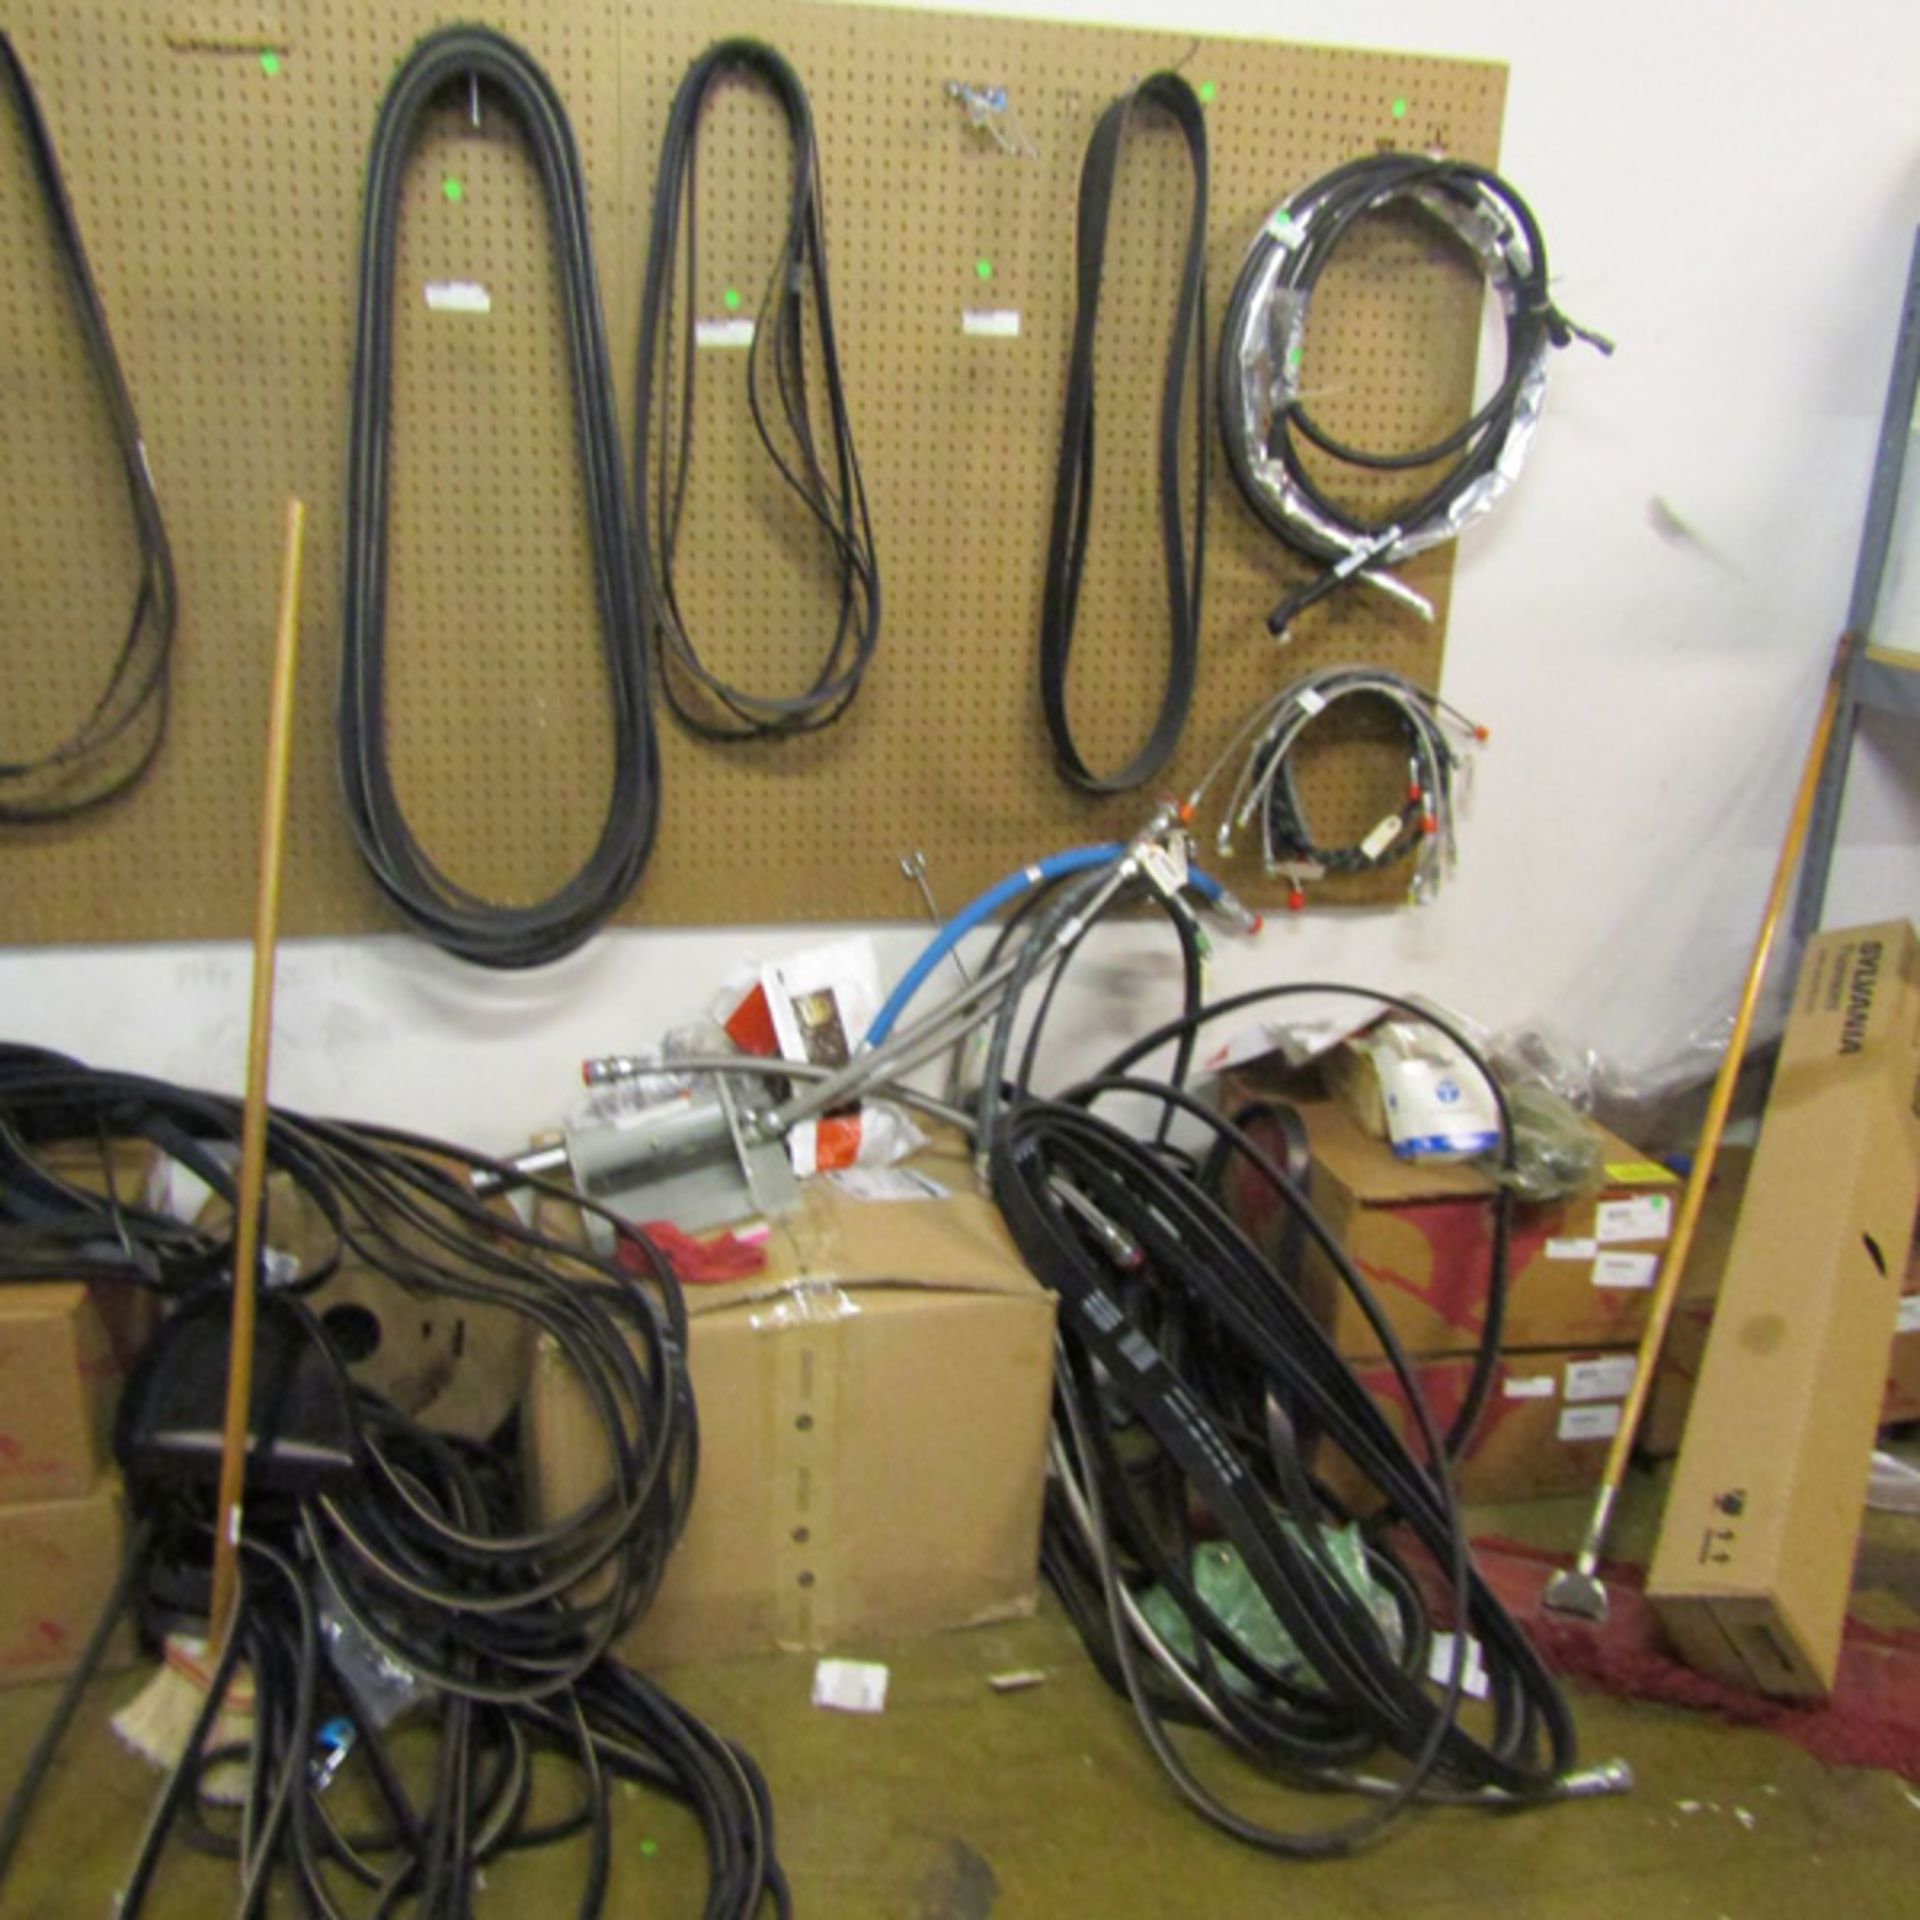 Lot of Assorted Spare Parts to Include: Misc. Belts & Bus Replacement Seats (Parts Room), Located